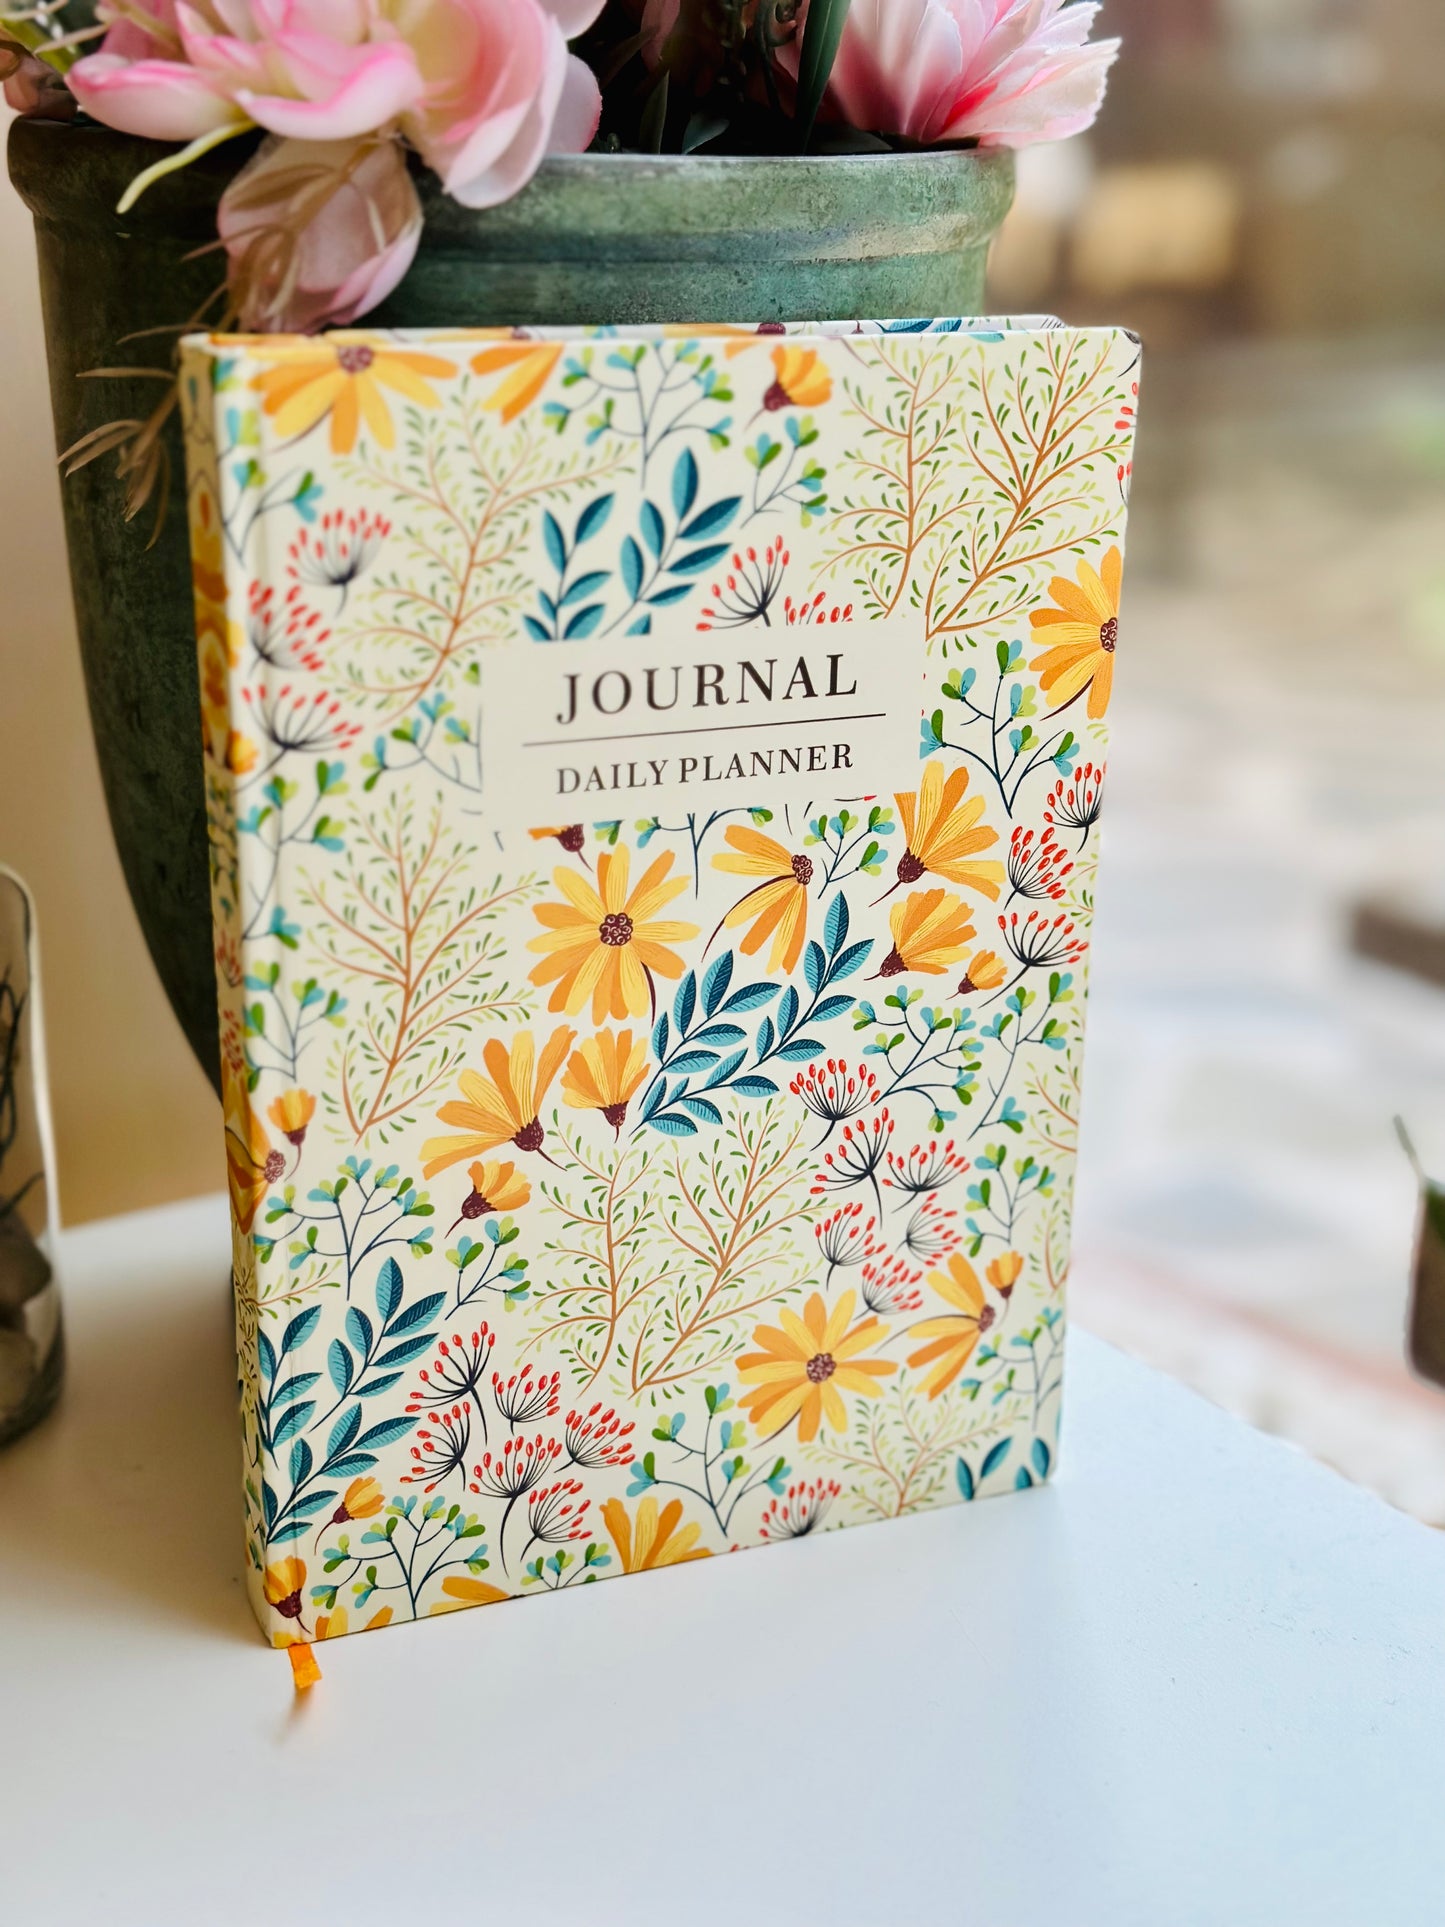 Daily planner | Floral rush